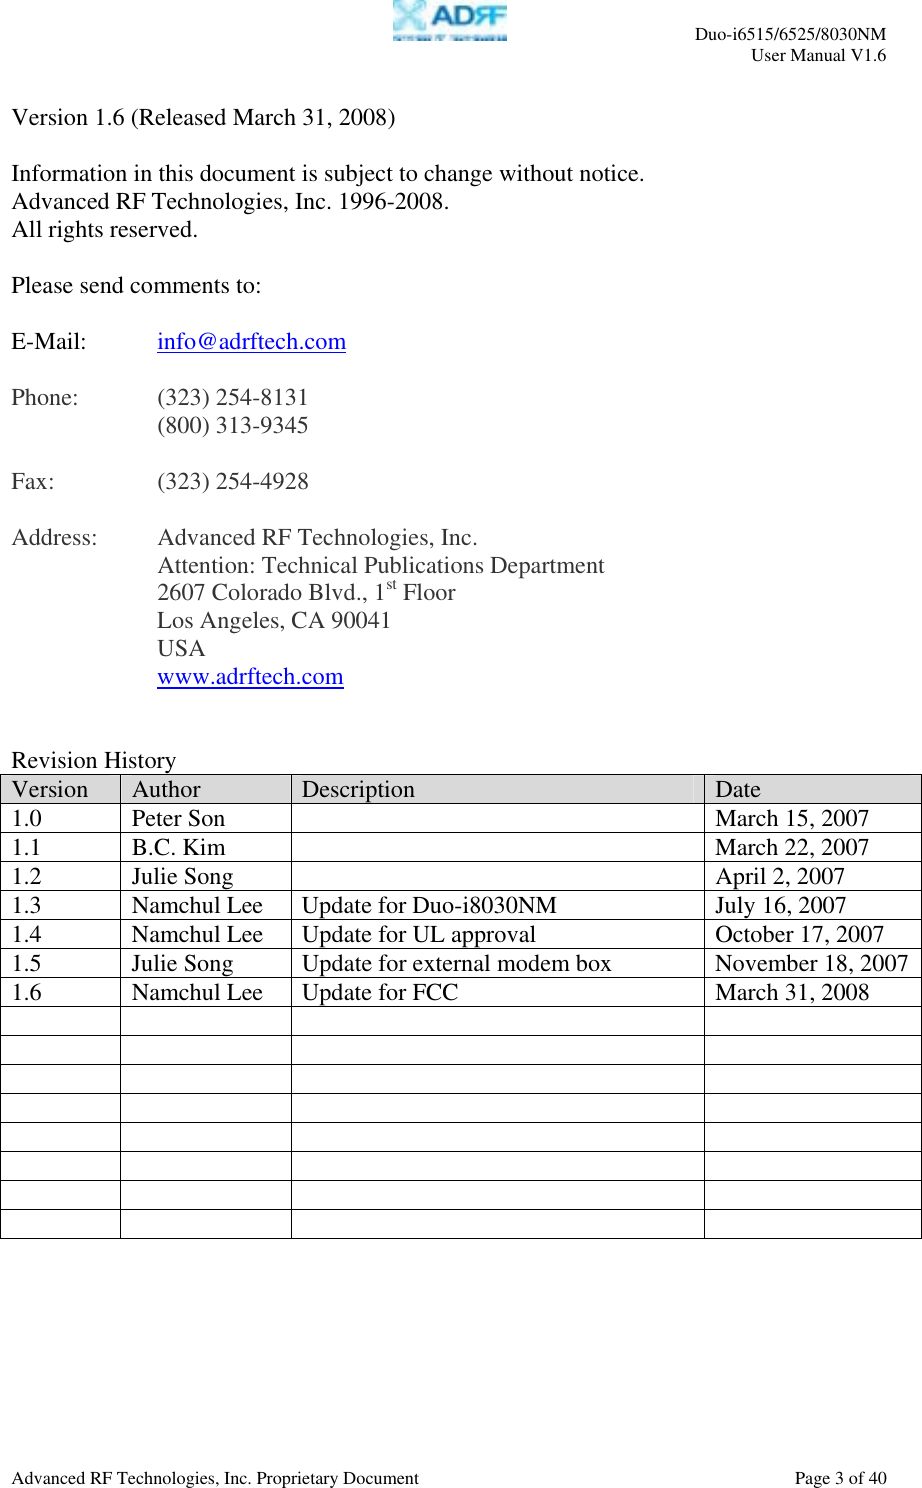     Duo-i6515/6525/8030NM  User Manual V1.6  Advanced RF Technologies, Inc. Proprietary Document    Page 3 of 40   Version 1.6 (Released March 31, 2008)  Information in this document is subject to change without notice. Advanced RF Technologies, Inc. 1996-2008.   All rights reserved.  Please send comments to:  E-Mail:  info@adrftech.com   Phone:   (323) 254-8131   (800) 313-9345  Fax:   (323) 254-4928  Address:  Advanced RF Technologies, Inc.     Attention: Technical Publications Department 2607 Colorado Blvd., 1st Floor Los Angeles, CA 90041 USA www.adrftech.com   Revision History Version  Author  Description  Date 1.0  Peter Son    March 15, 2007 1.1  B.C. Kim    March 22, 2007 1.2  Julie Song    April 2, 2007 1.3  Namchul Lee  Update for Duo-i8030NM  July 16, 2007 1.4  Namchul Lee   Update for UL approval  October 17, 2007 1.5  Julie Song  Update for external modem box  November 18, 20071.6  Namchul Lee   Update for FCC  March 31, 2008                                                    